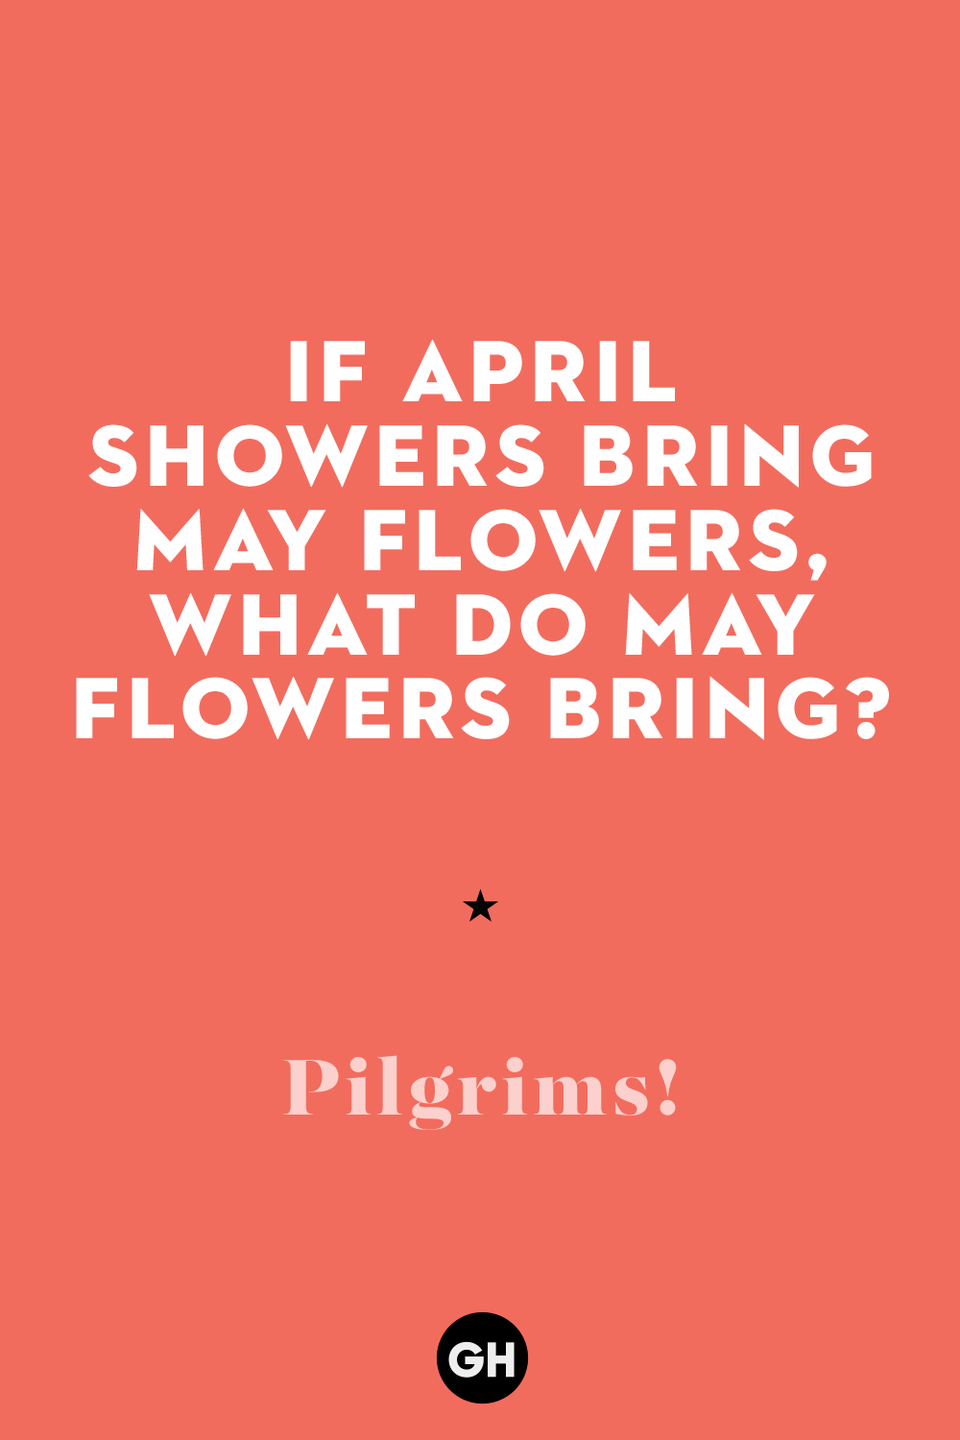 52) If April showers bring May flowers, what do May flowers bring?